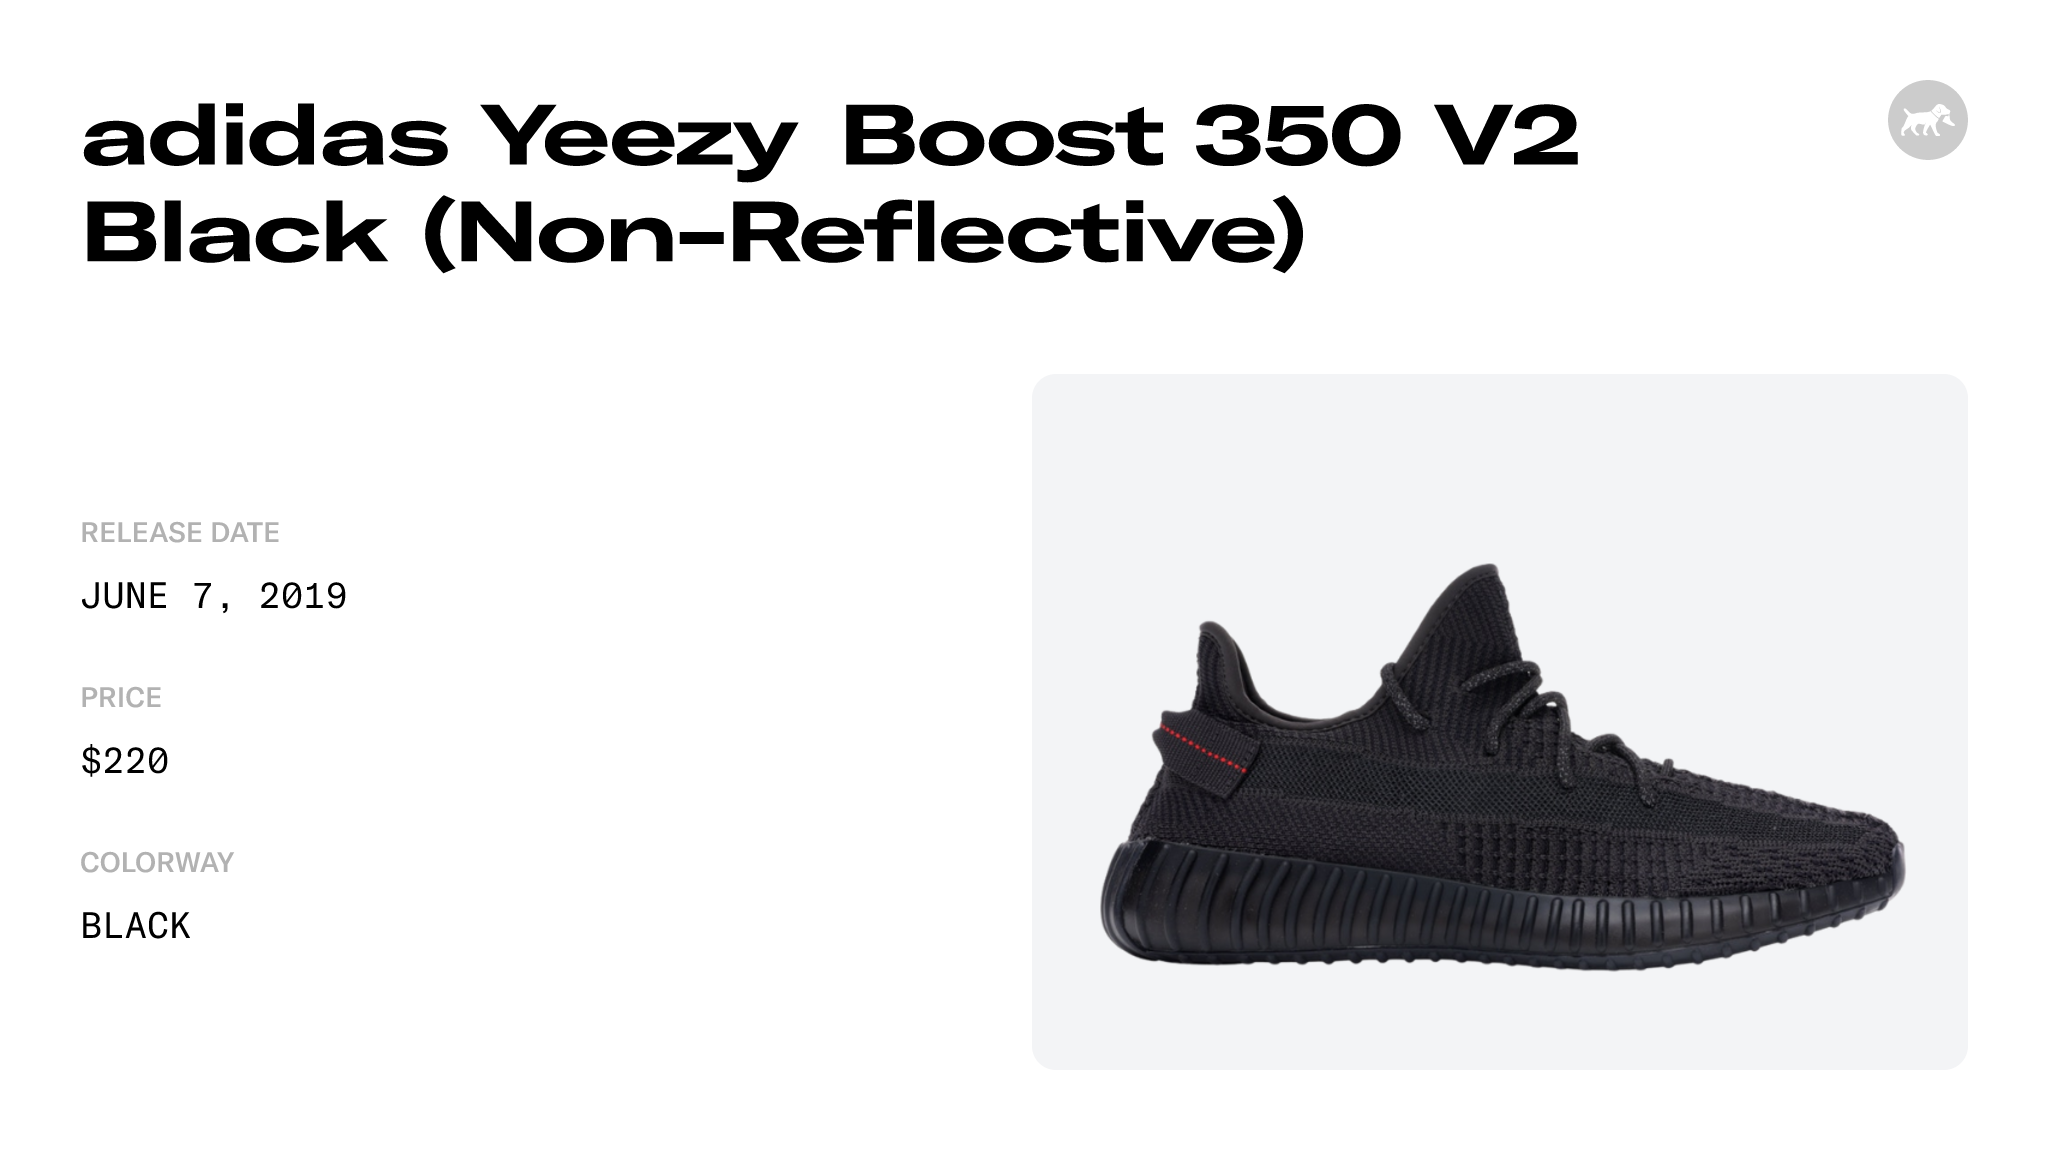 adidas Yeezy Boost 350 V2 Black (Non-Reflective) - FU9006 Raffles and  Release Date